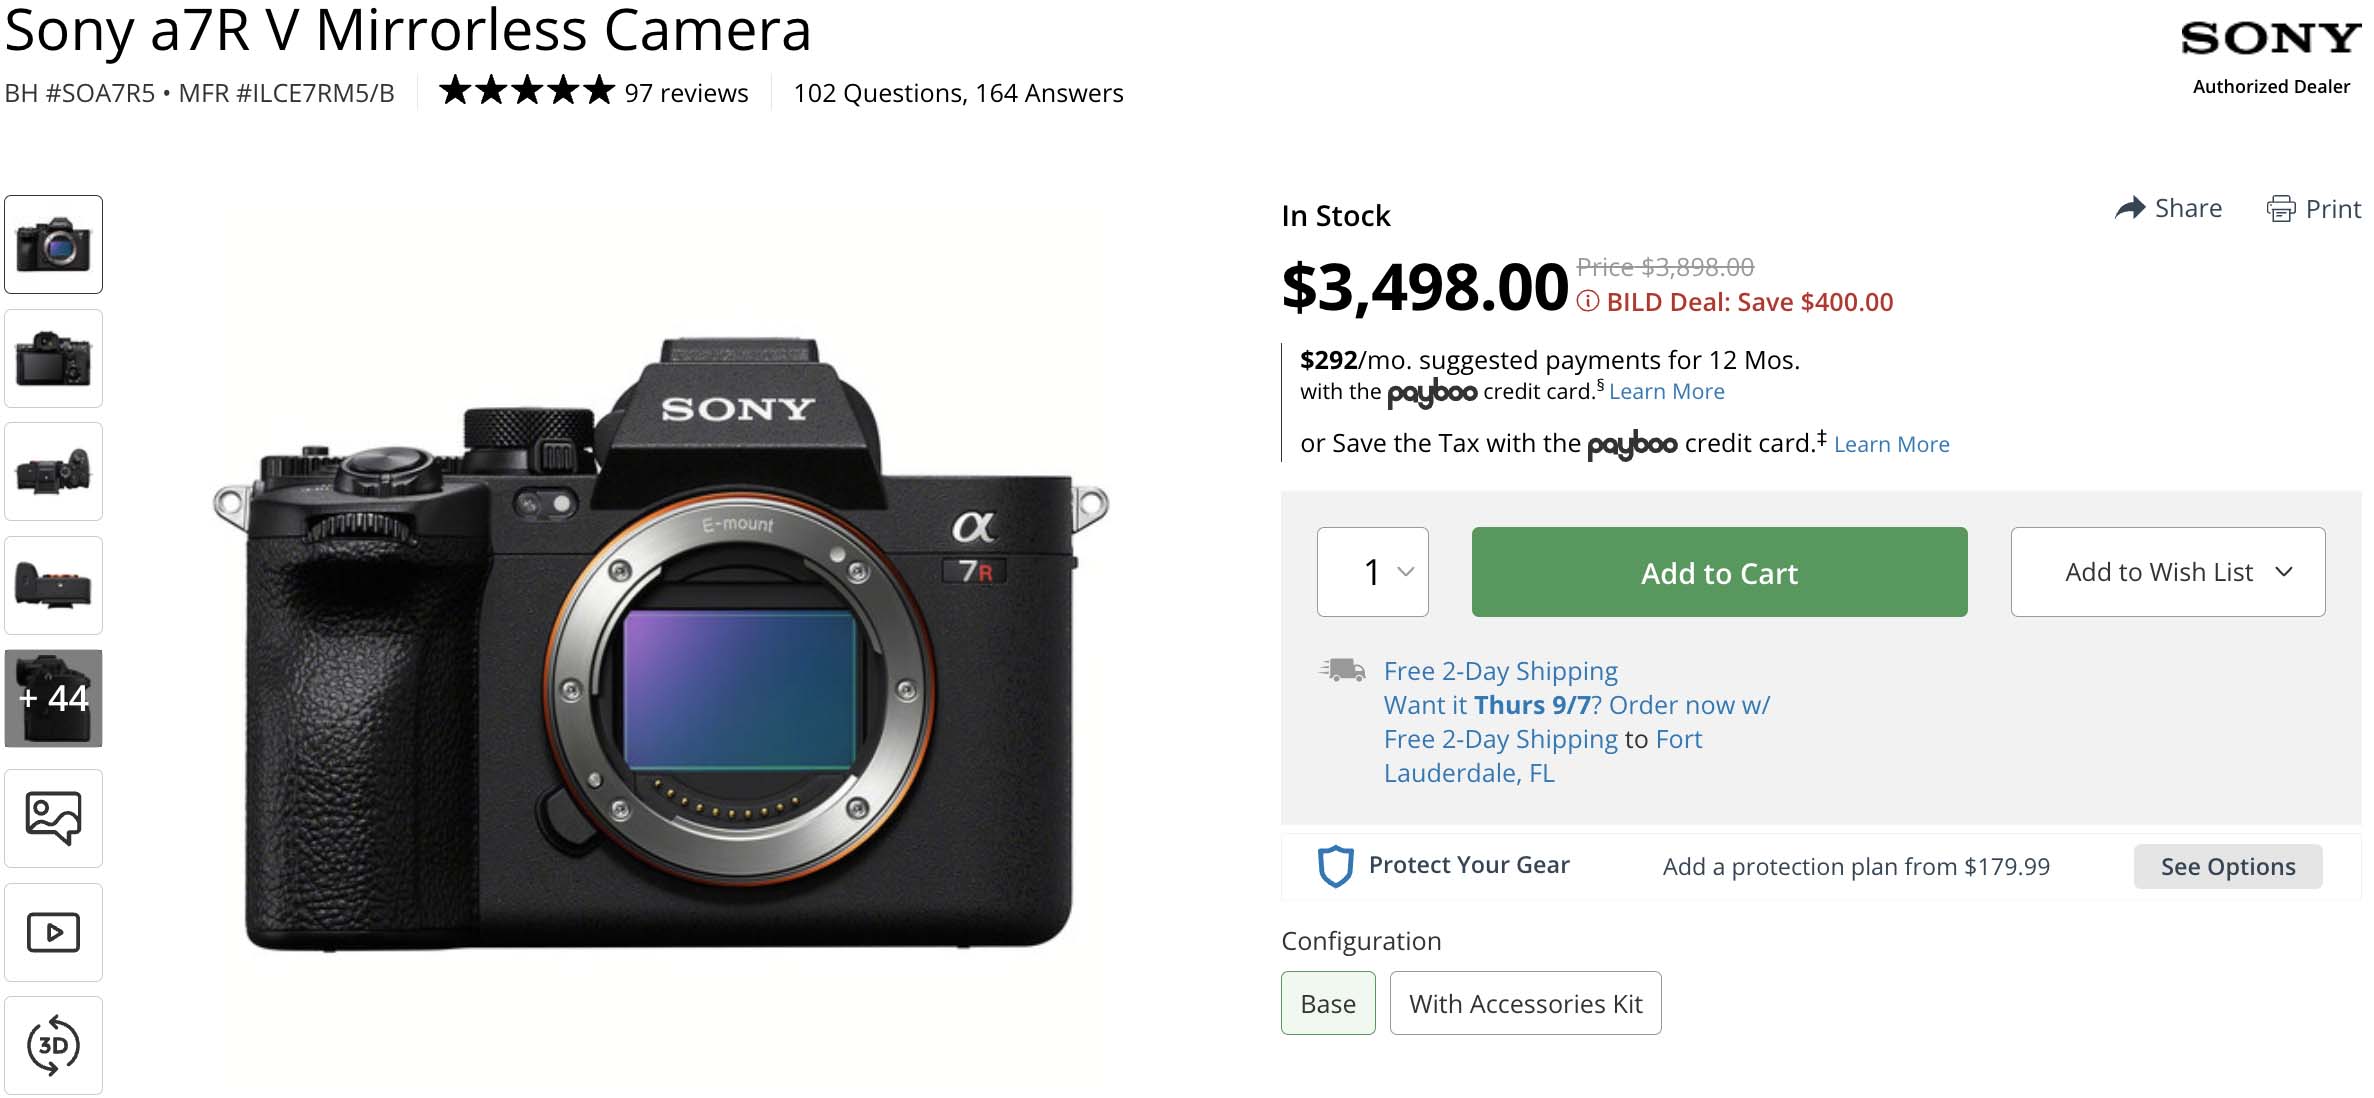 Big Sony a7RV and a7IV Savings Plus Much More - Sony Addict